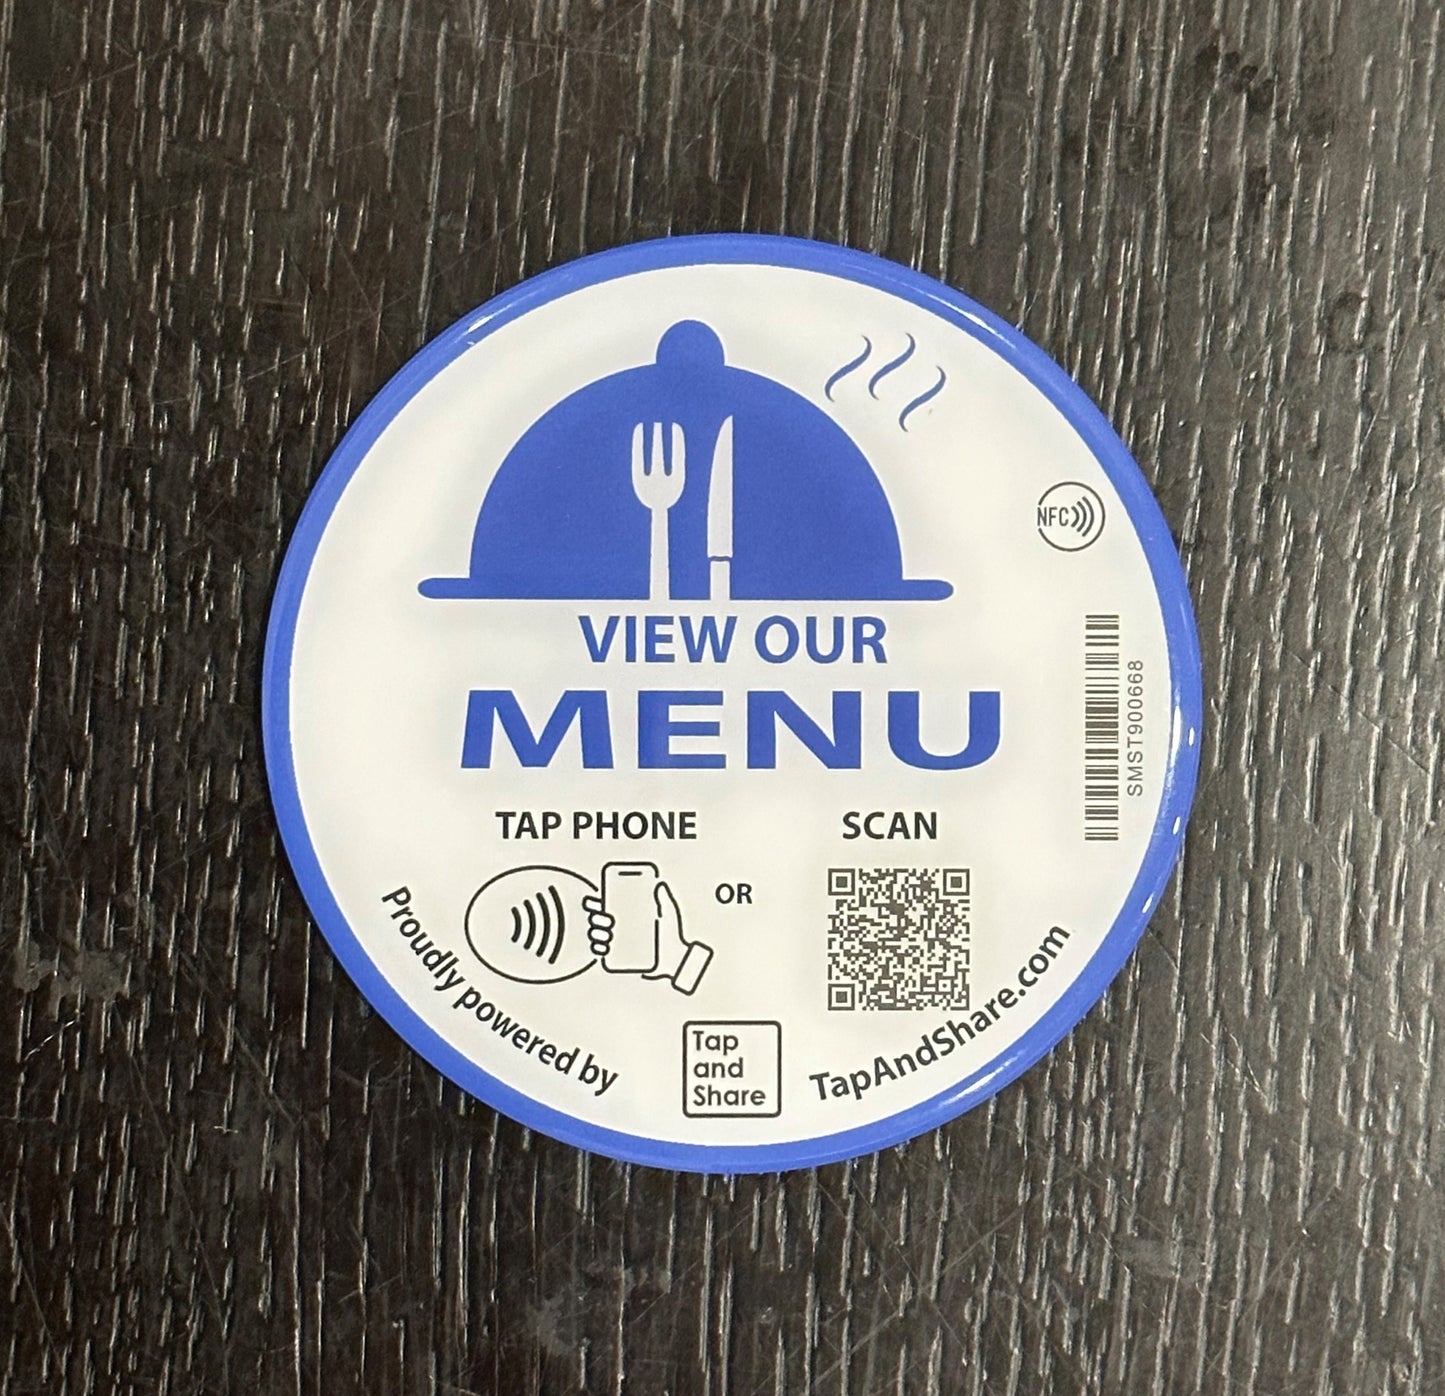 Large 10cm Contactless Smart NFC Touchless View Our Menu' Round Epoxy Sticker + QR code | Extra Durable | Stick it on your Table, Counter, Wall or Window | Restaurants | Cafe | Takeaway